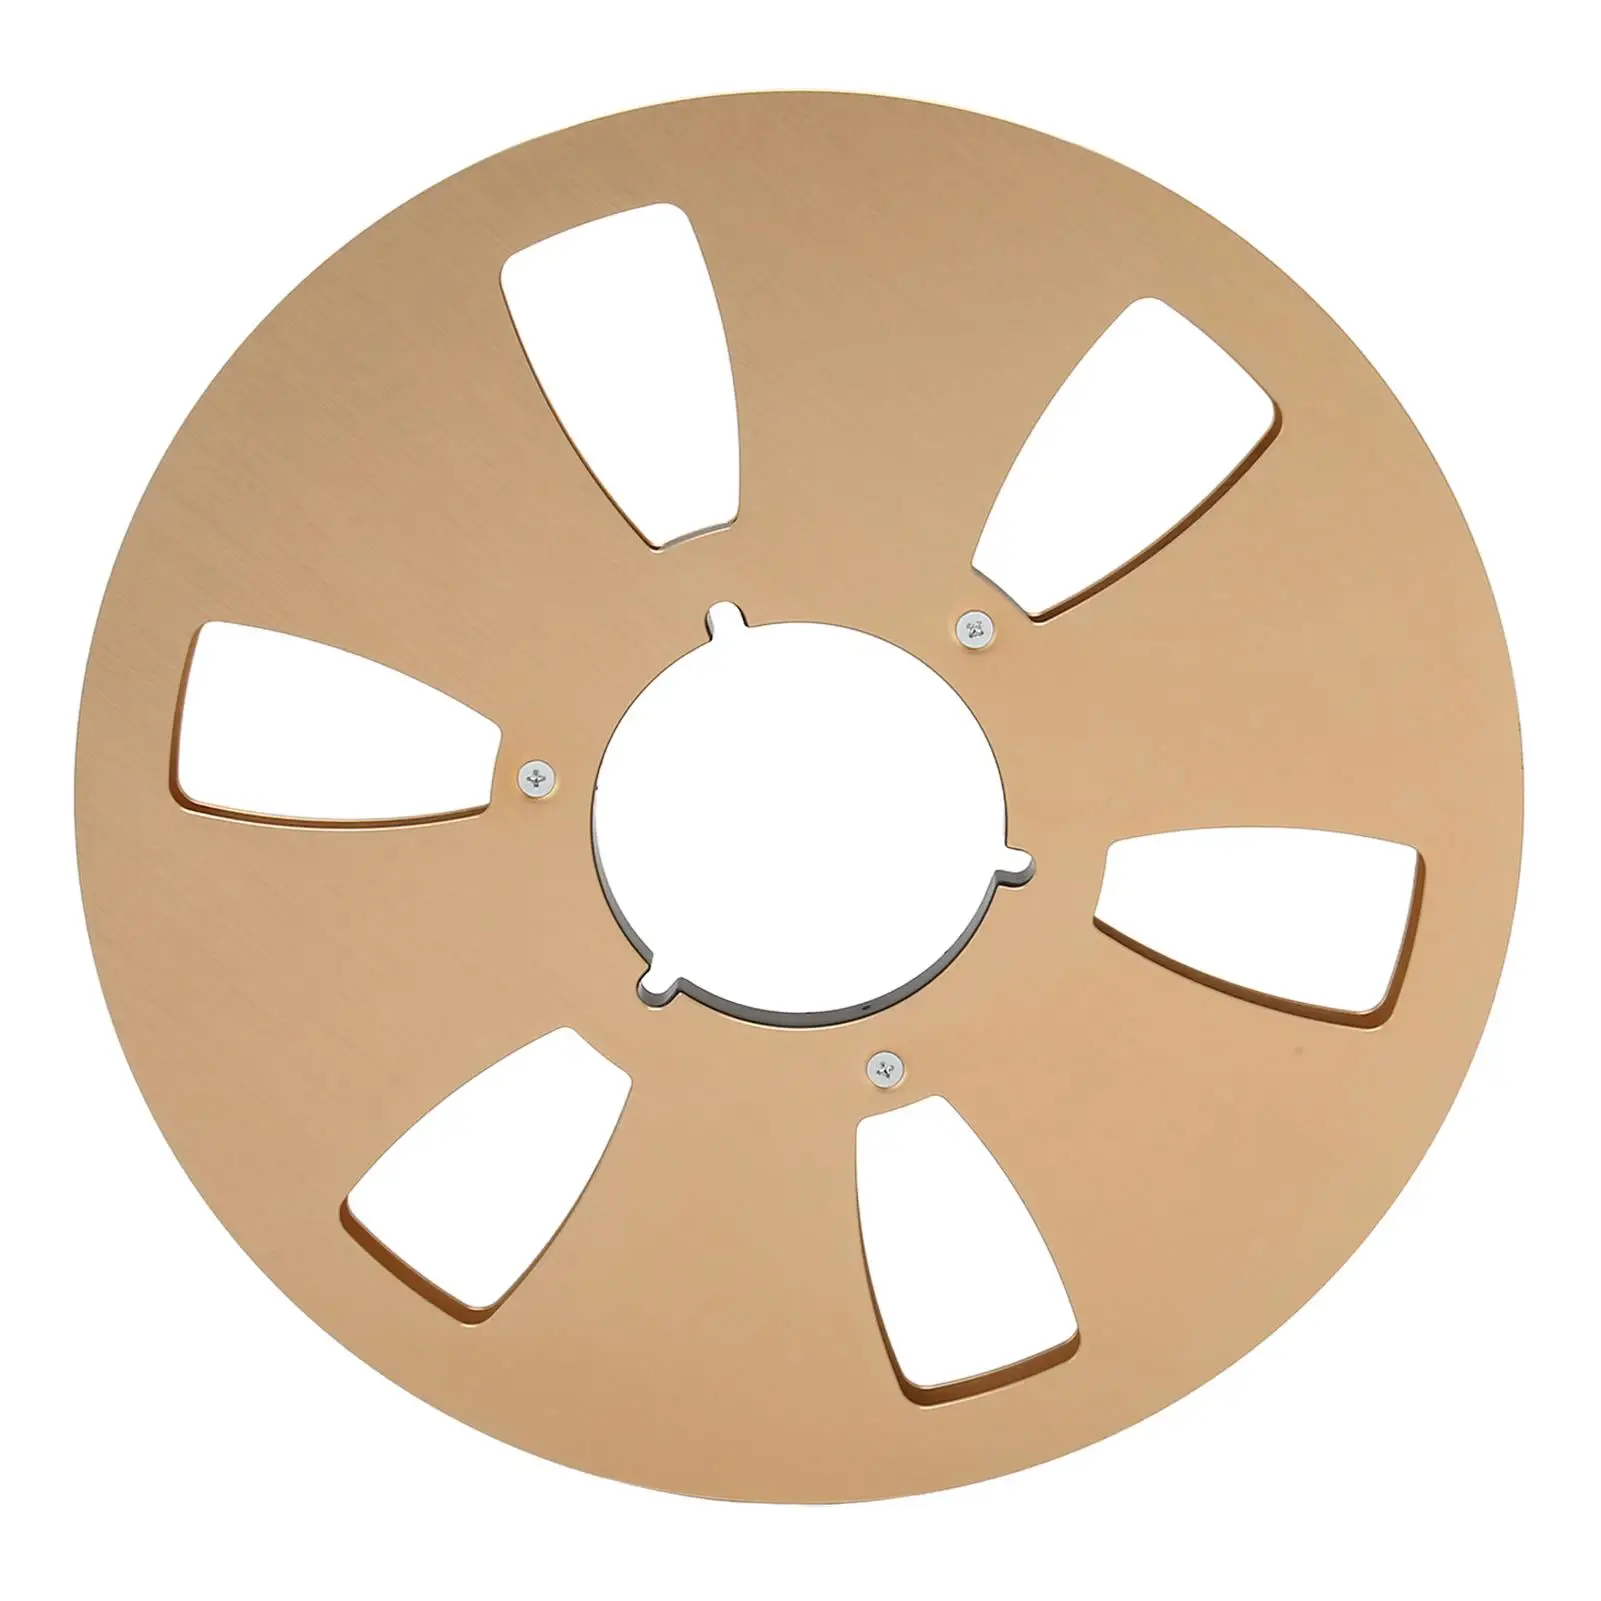 

10 Inch Aluminum Alloy Tape Reel with 6-Hole Opening - Universal Sound Tape Takeup Reel for Machine Parts